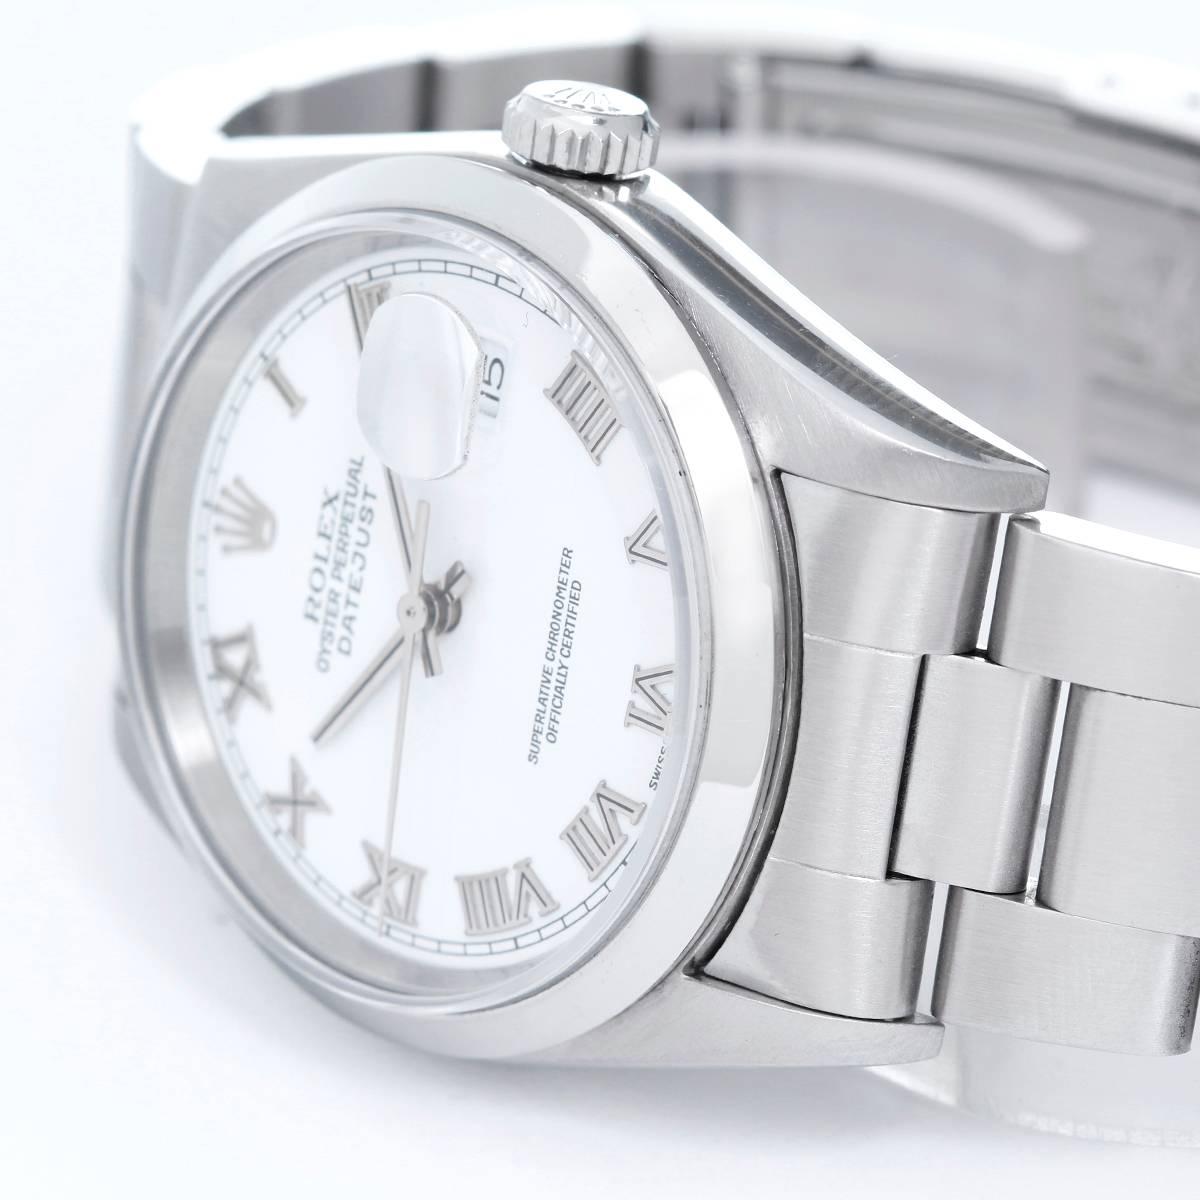 Rolex Datejust Men's Stainless Steel White Roman Numerals Watch 16200 -  Automatic winding, Quickset, sapphire crystal. Stainless steel case with smooth bezel (36mm diameter). White dial with Roman Numerals. Stainless steel Oyster bracelet.